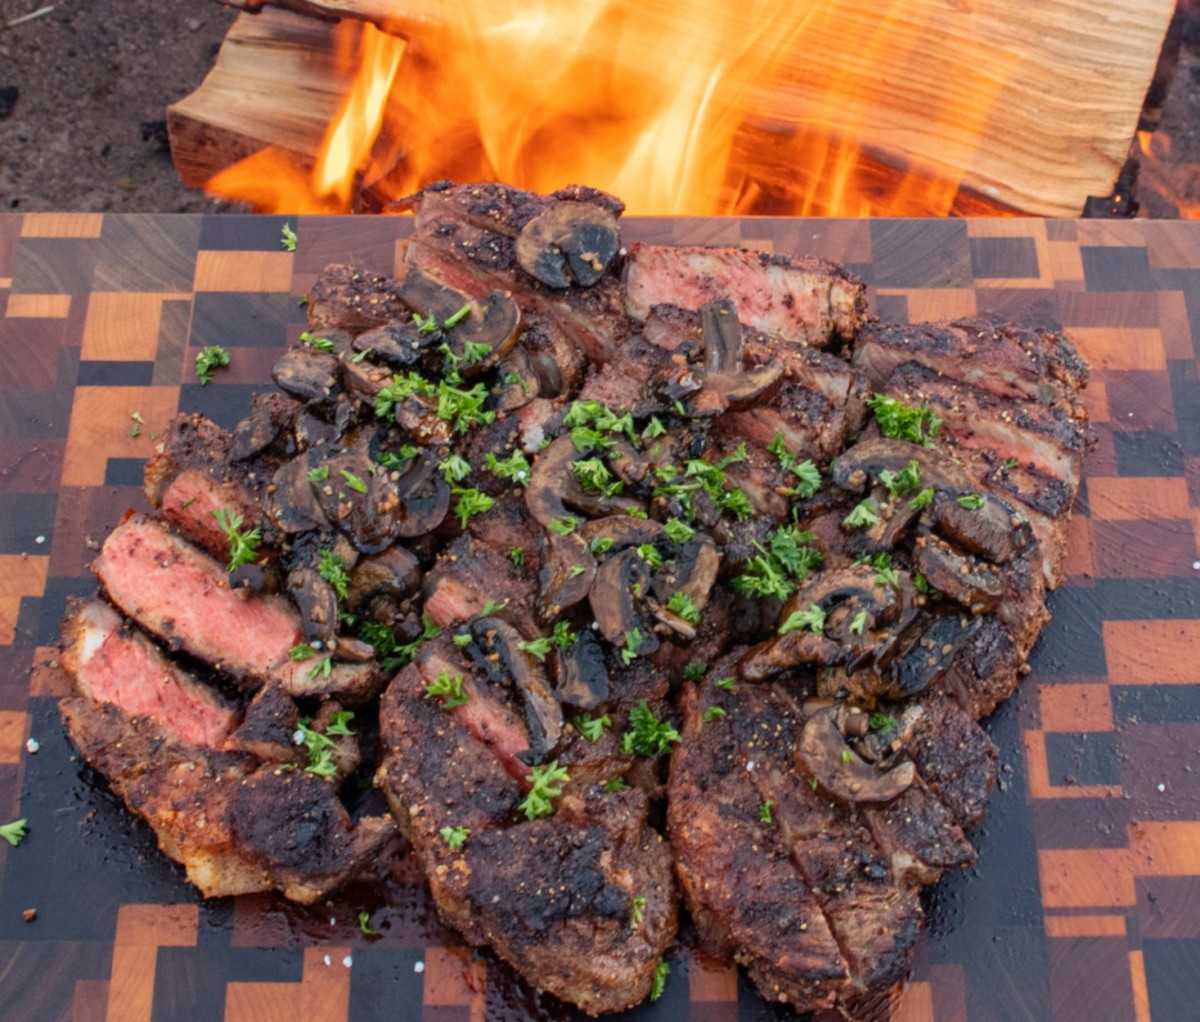 How to Grill With Wood and Master Campfire Cooking